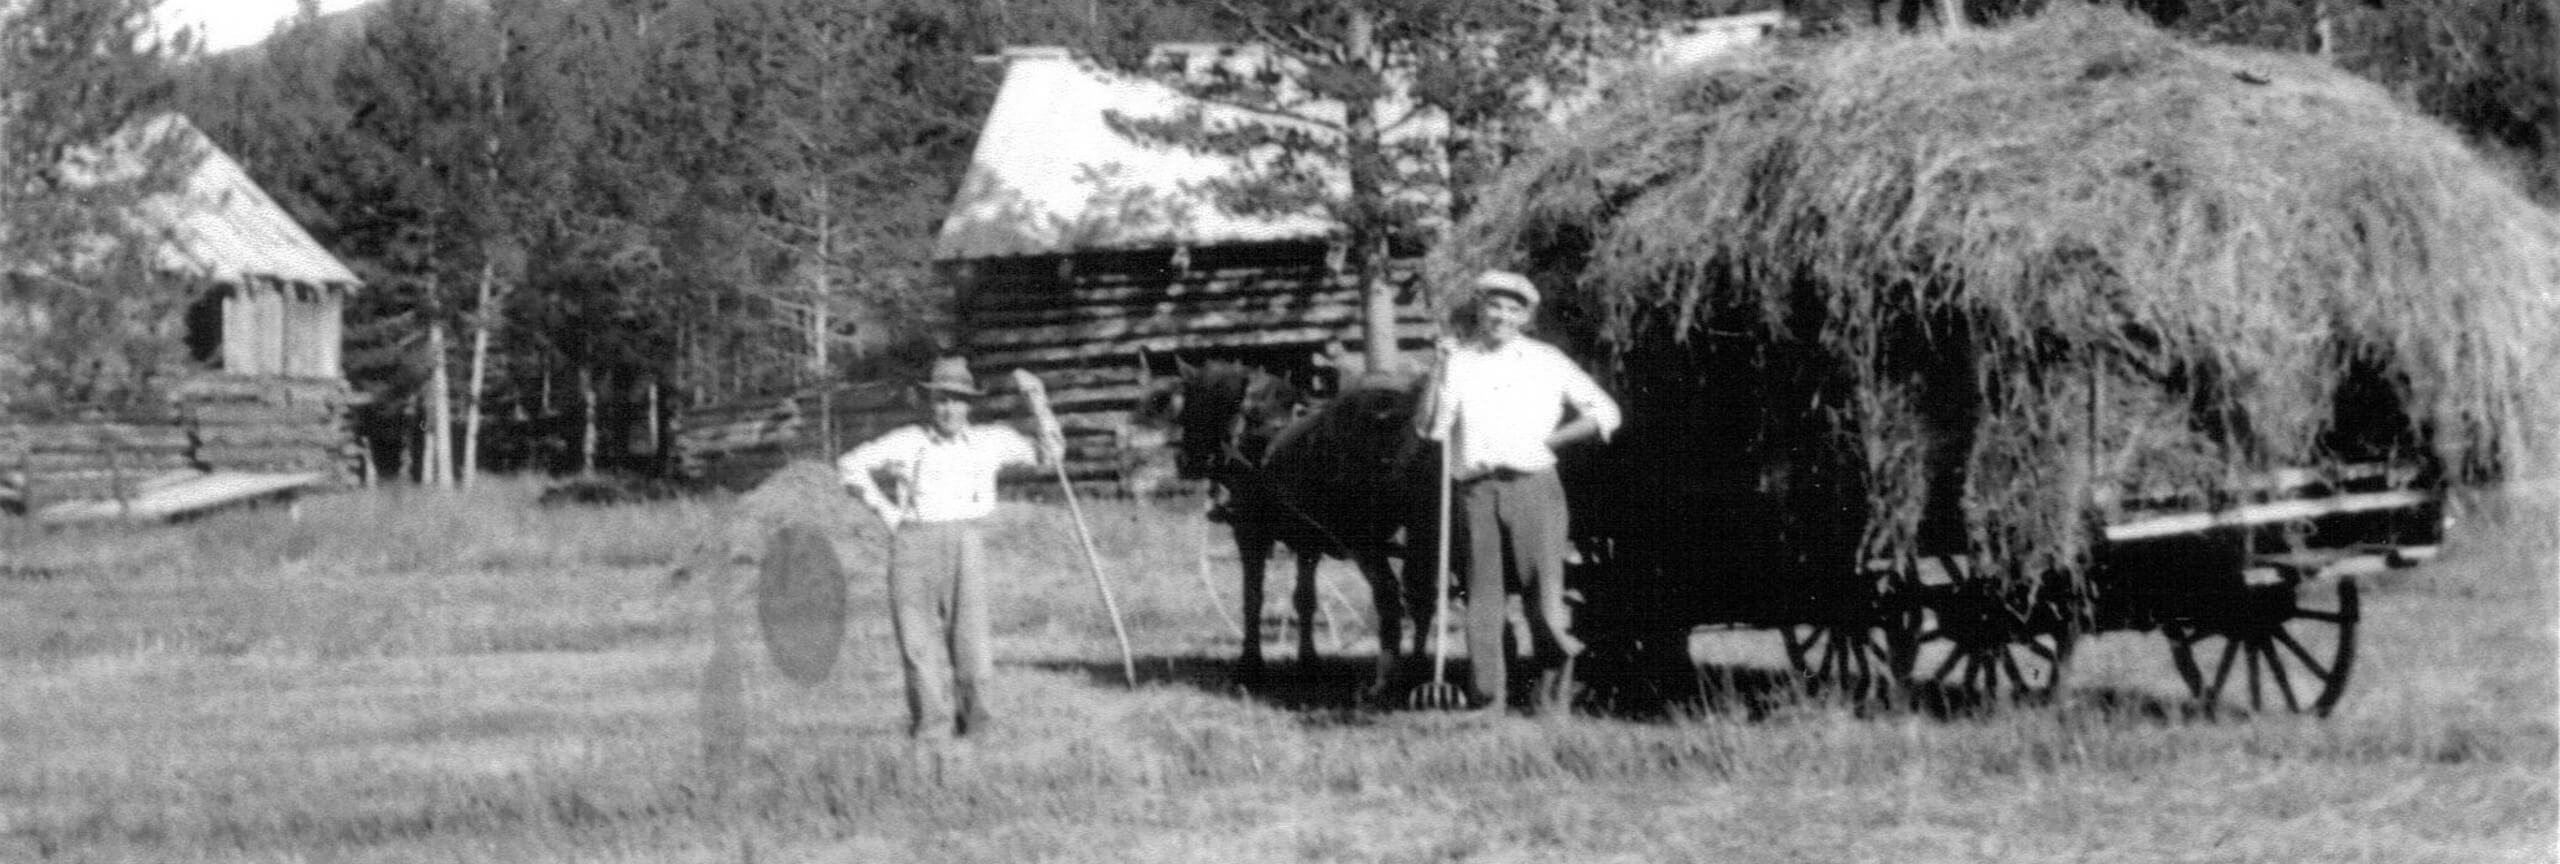 Historic photo of two men working on Bill's Ranch in Frisco